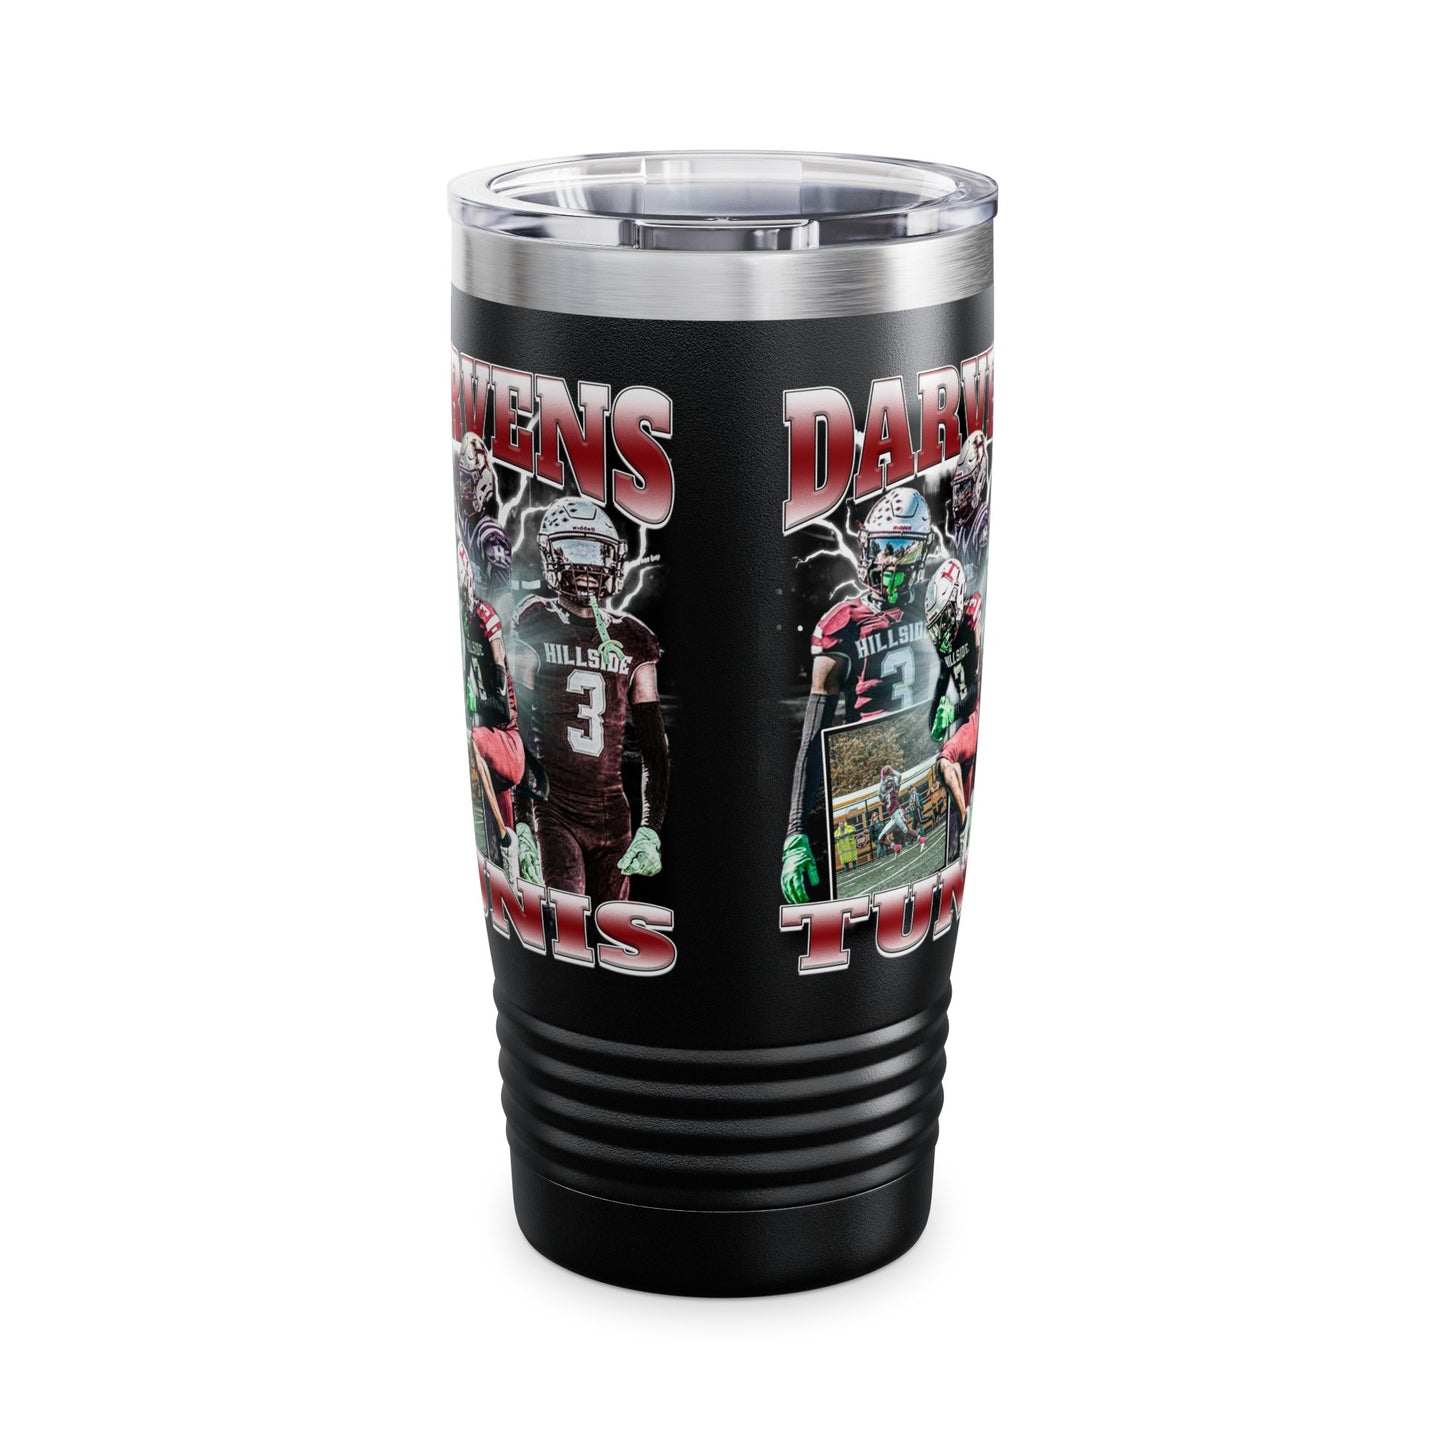 Darvens Tunis Stainless Steal Tumbler